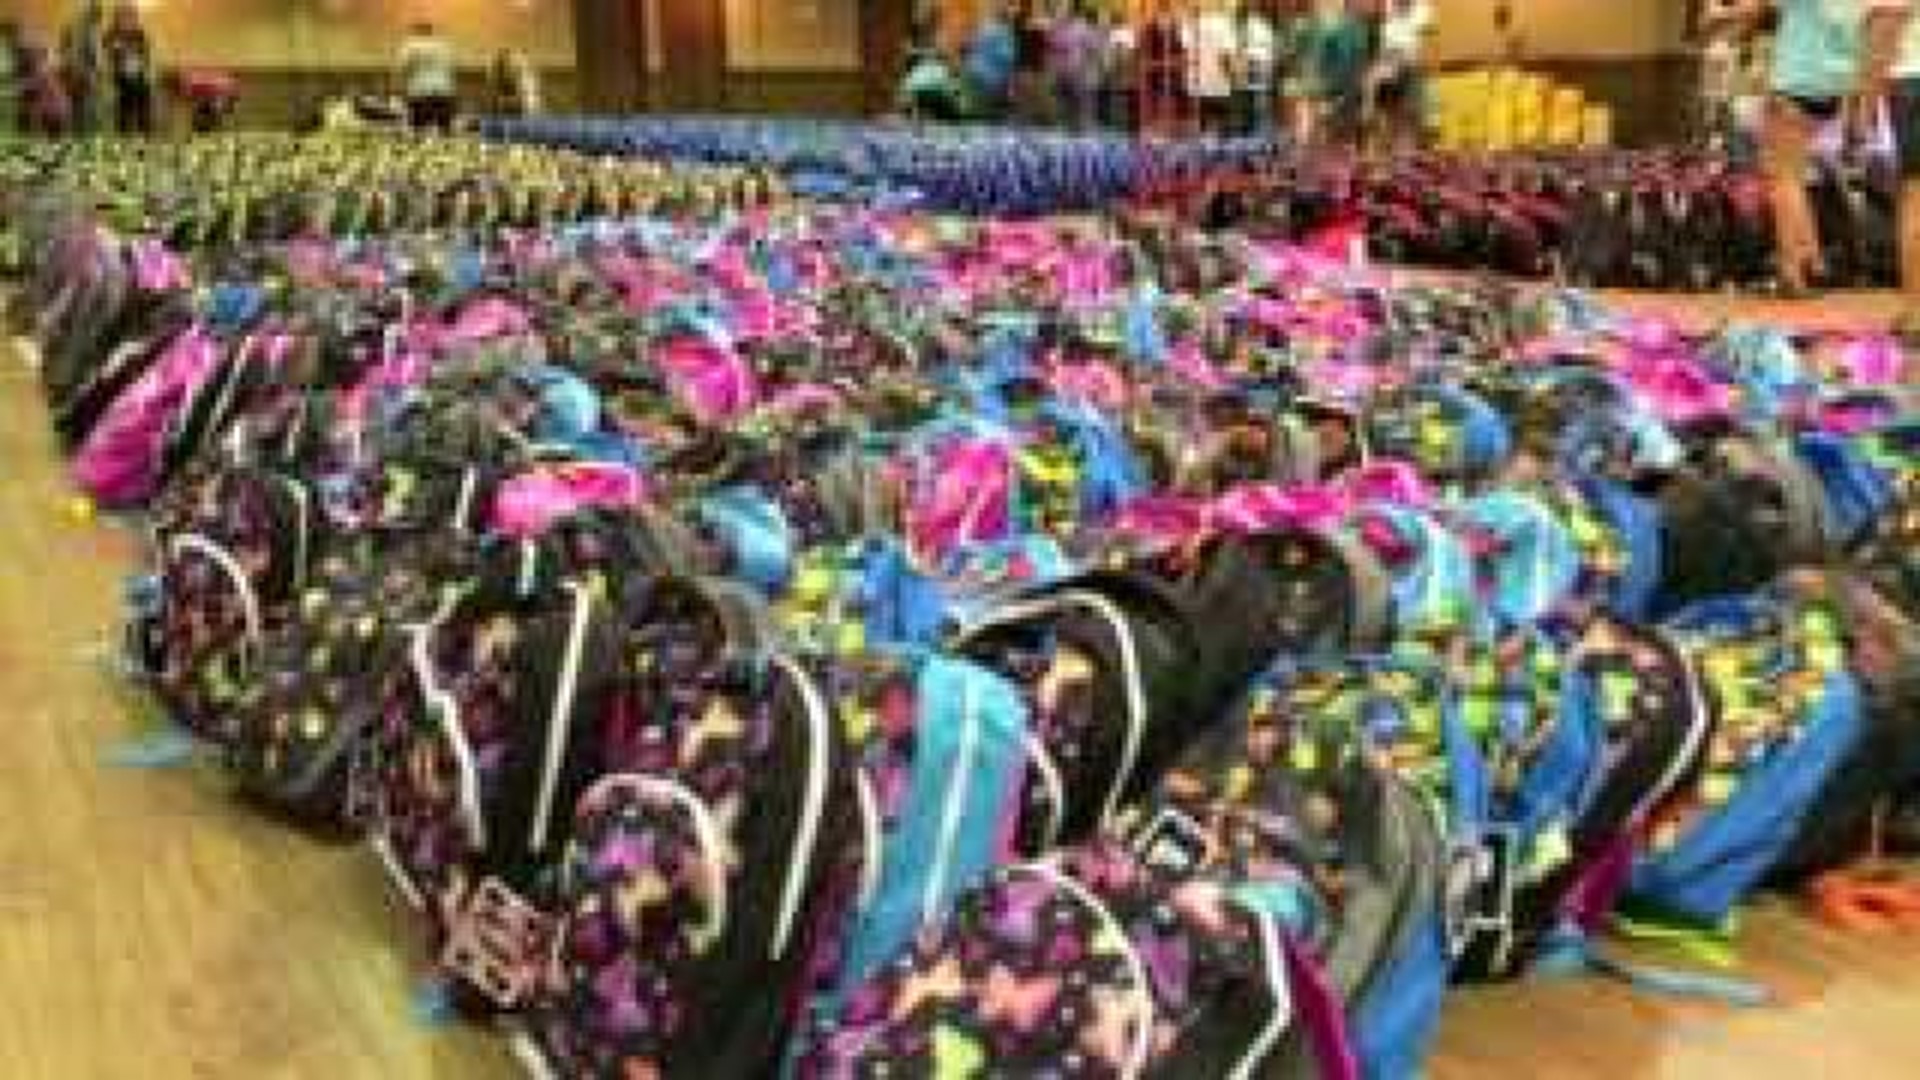 Harvest Time Church Filling Up Backpacks For Children In Need